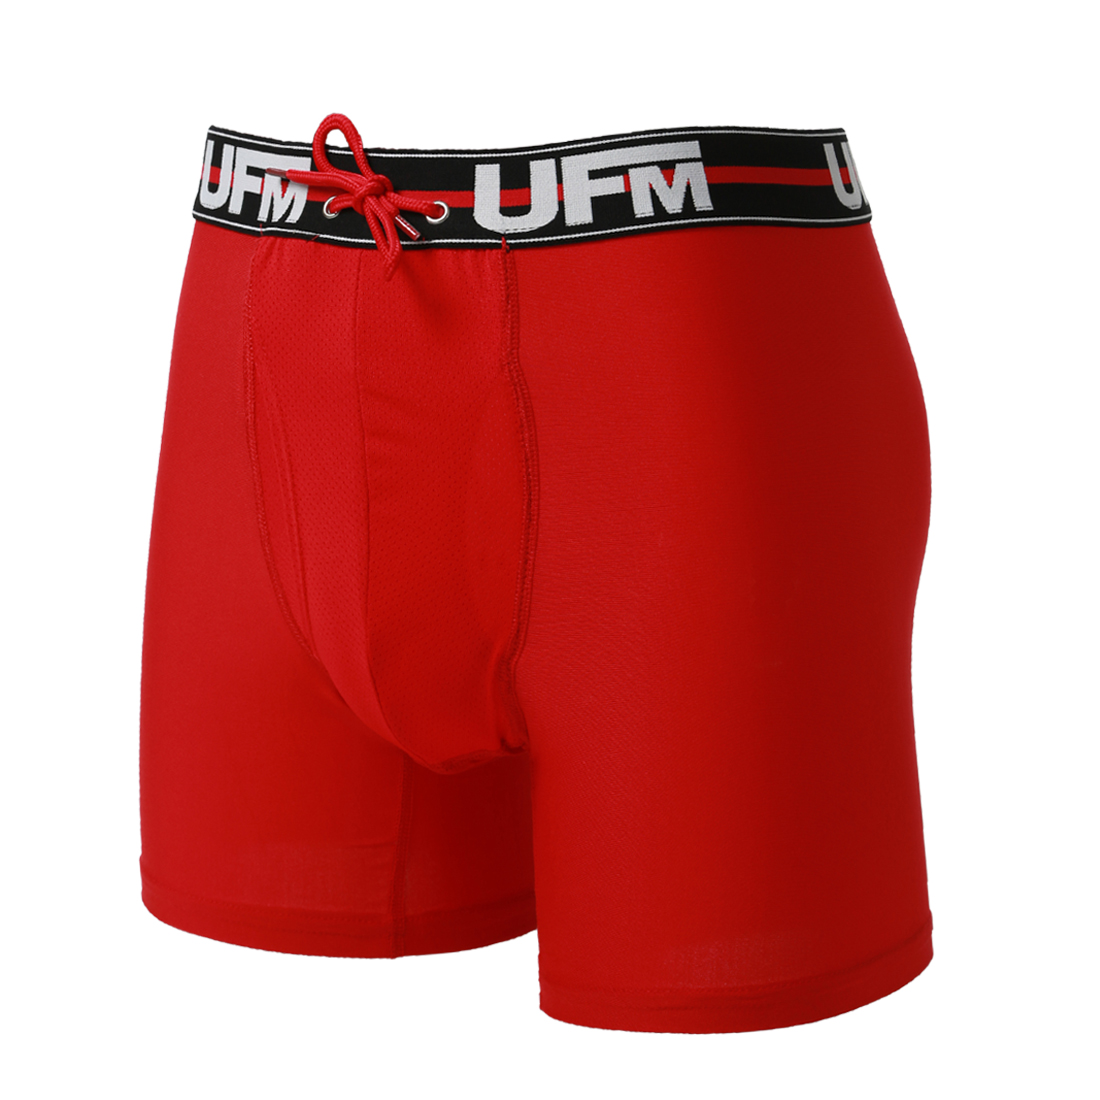 Parent UFM Underwear for Men Big and Tall Polyester 6 inch Original Max Boxer Brief Red 800